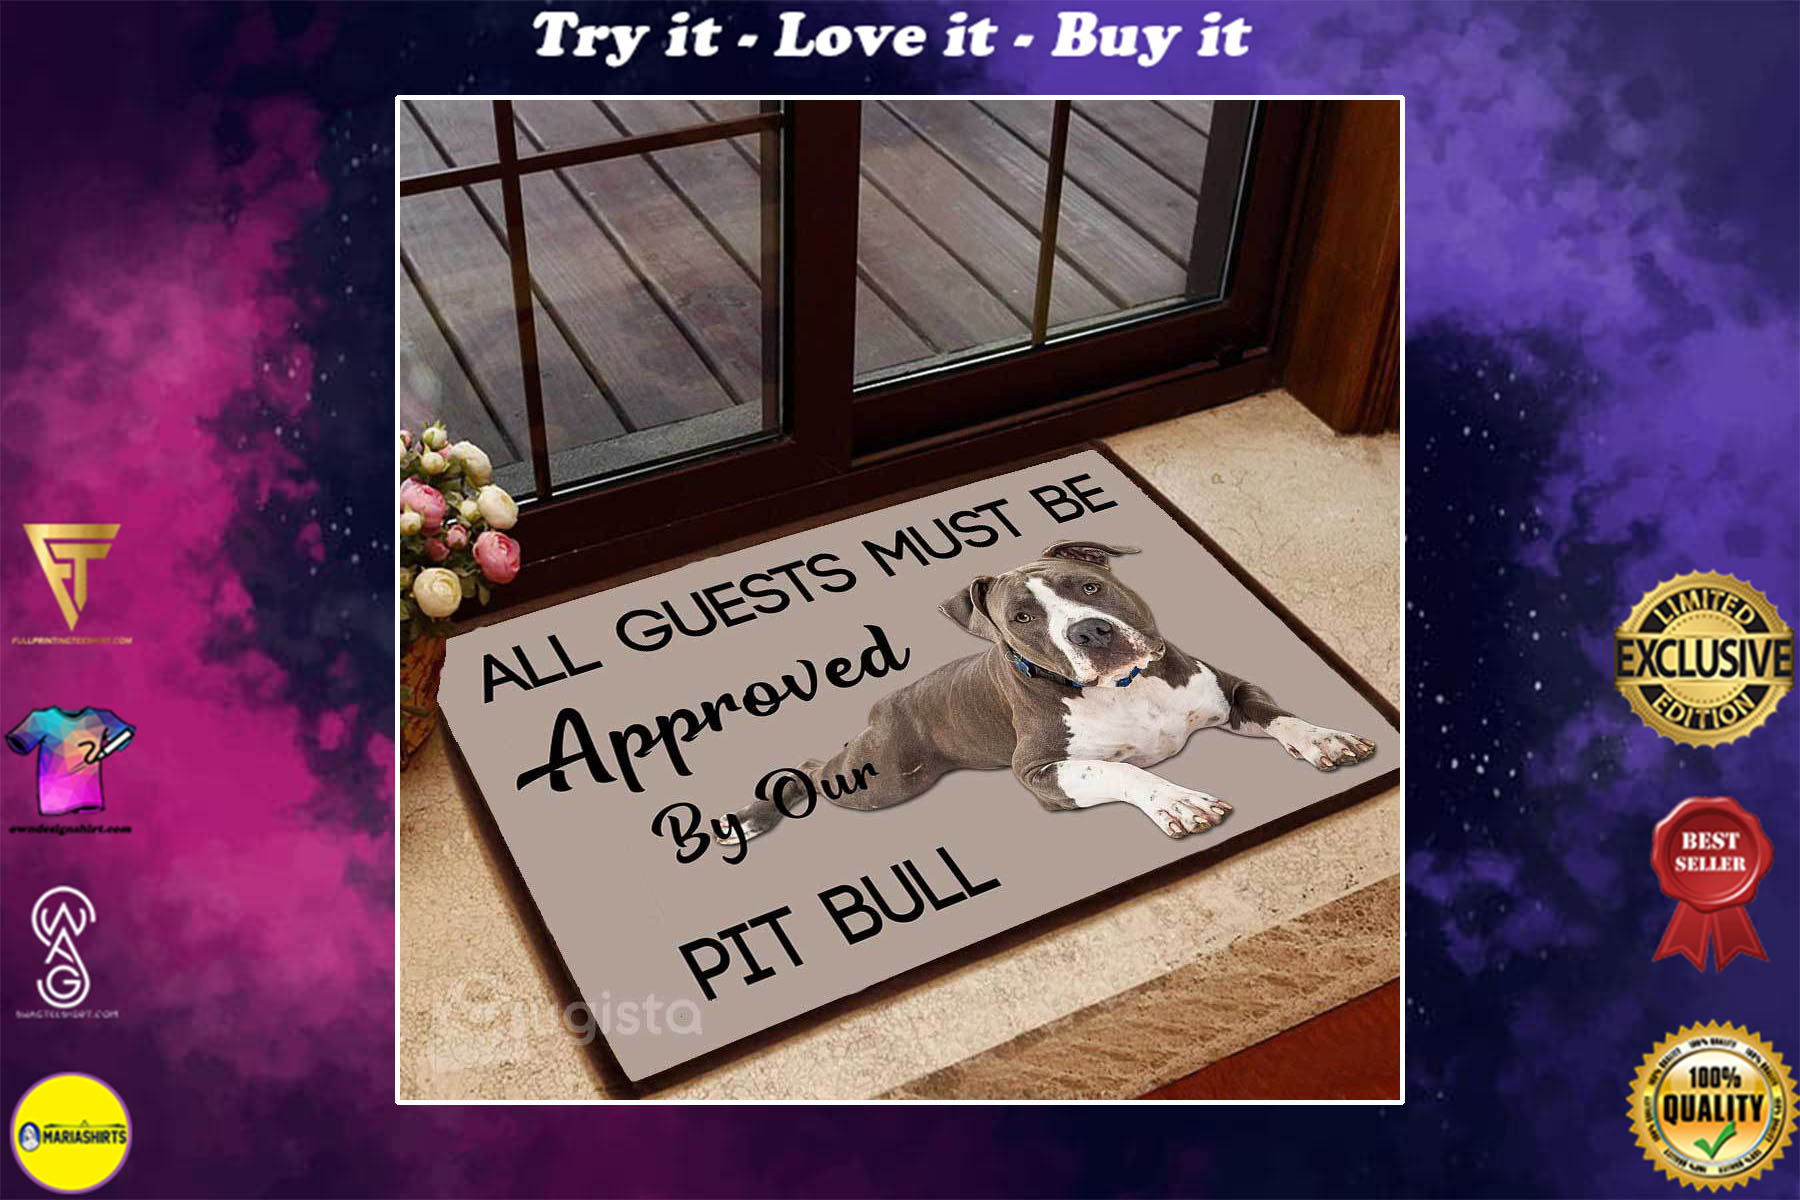 all guests must be approved by our pit bull lying down doormat